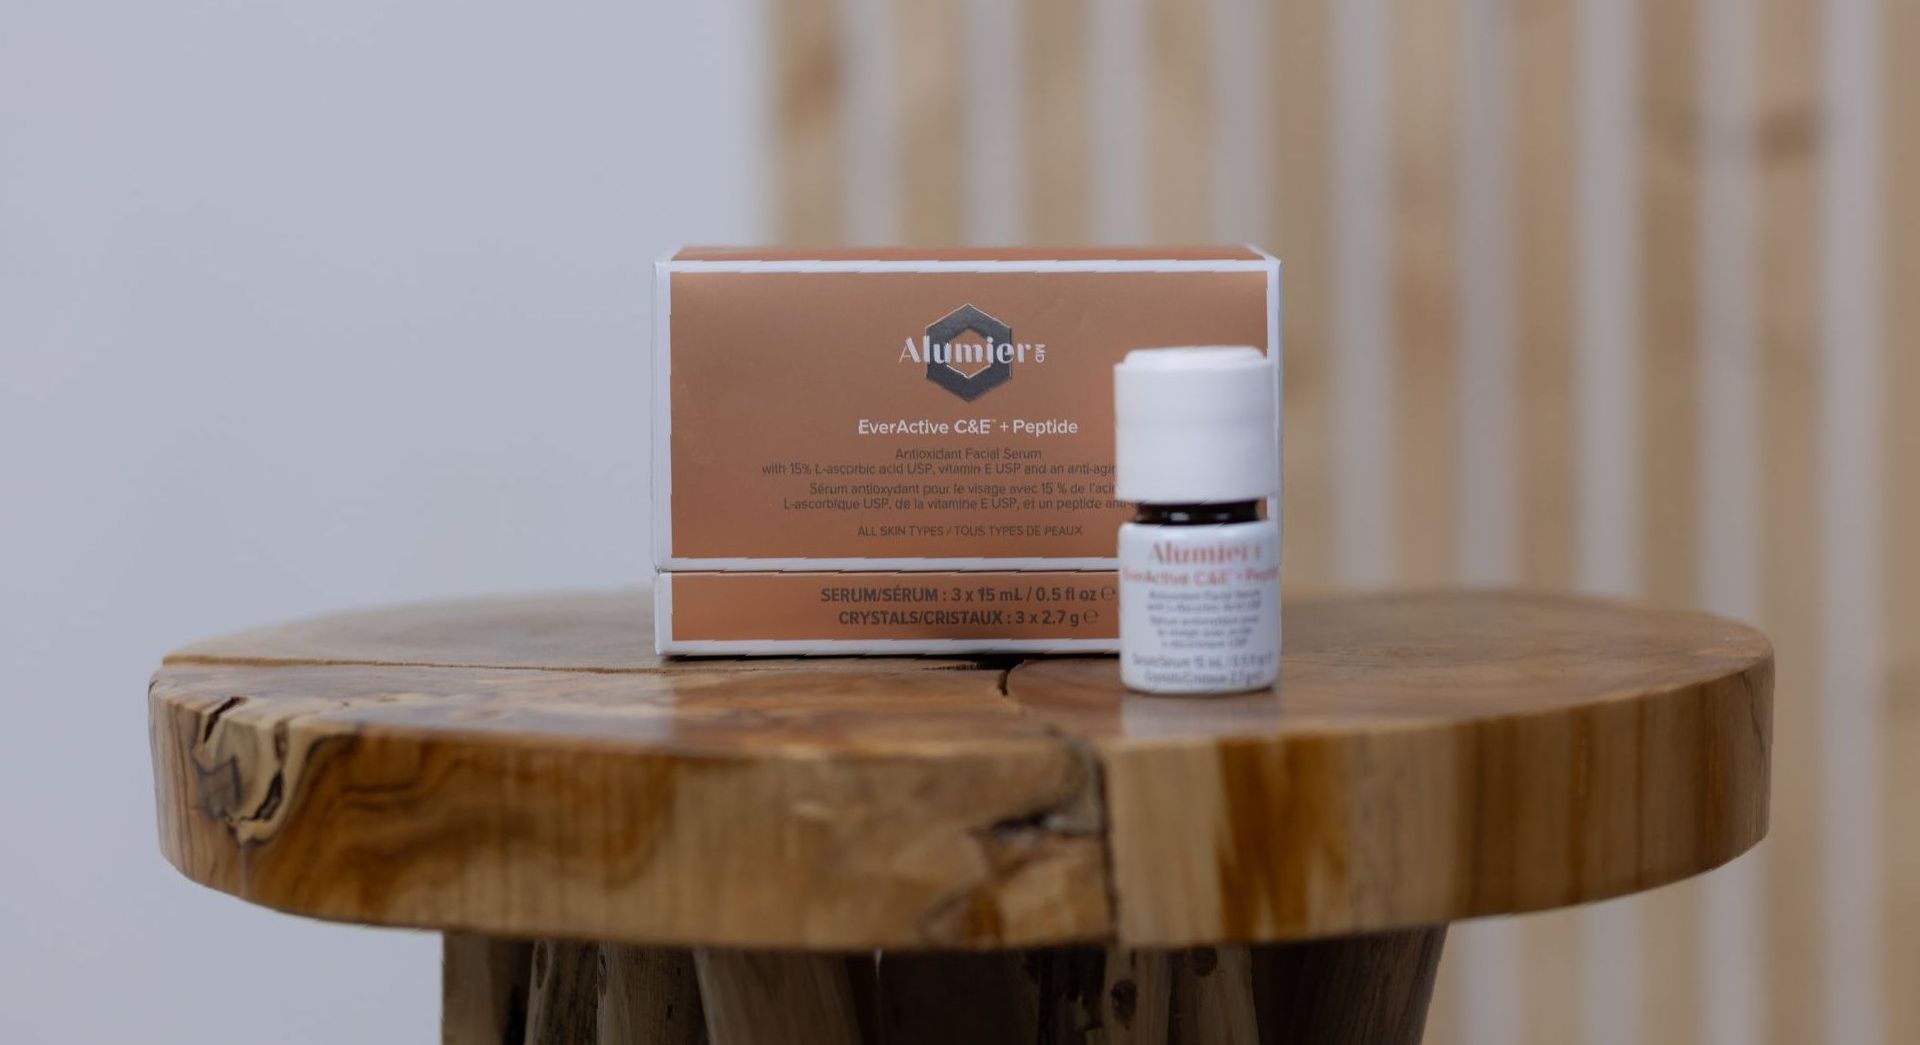 AlumierMD skin care products on wooden stool